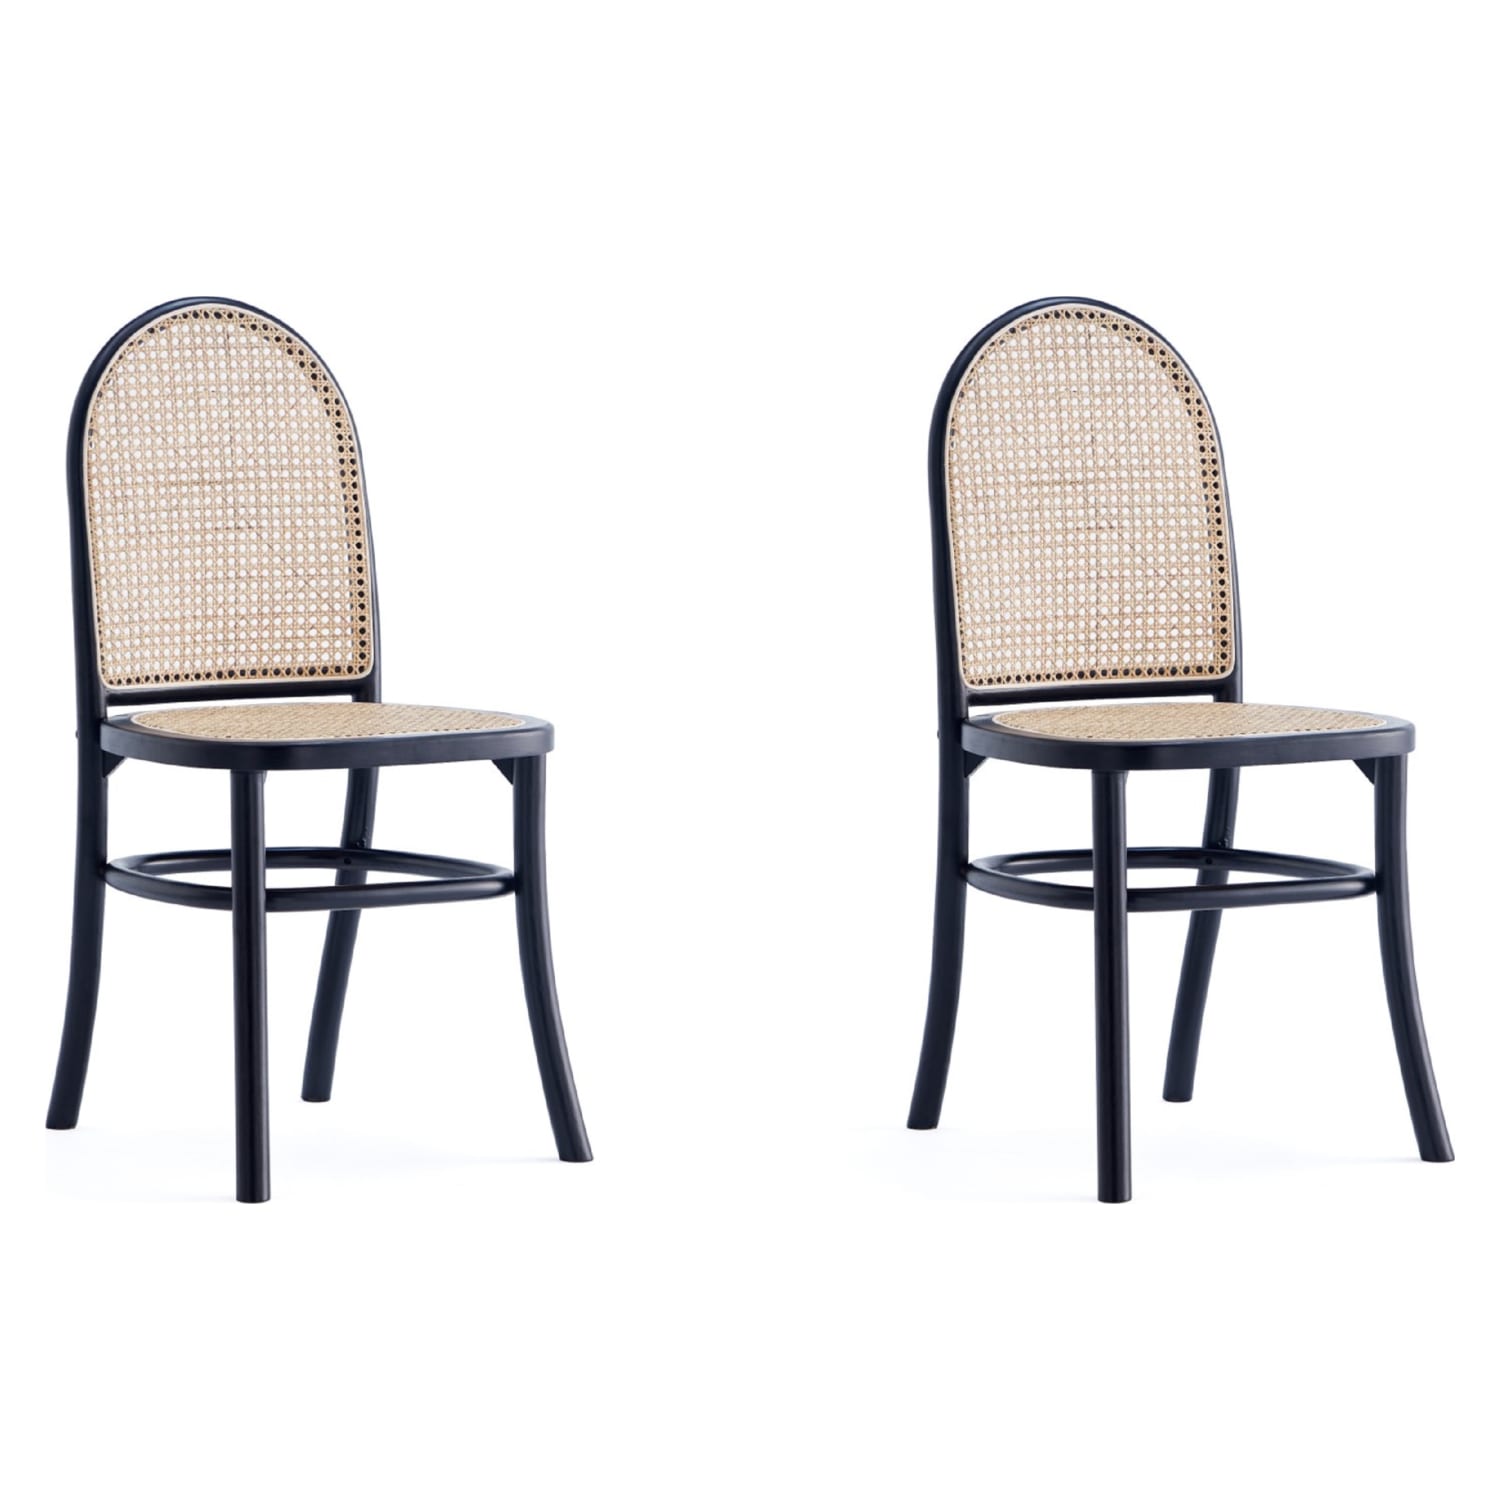 Paragon Dining Chair 2.0 in Black and Cane - Set of 2